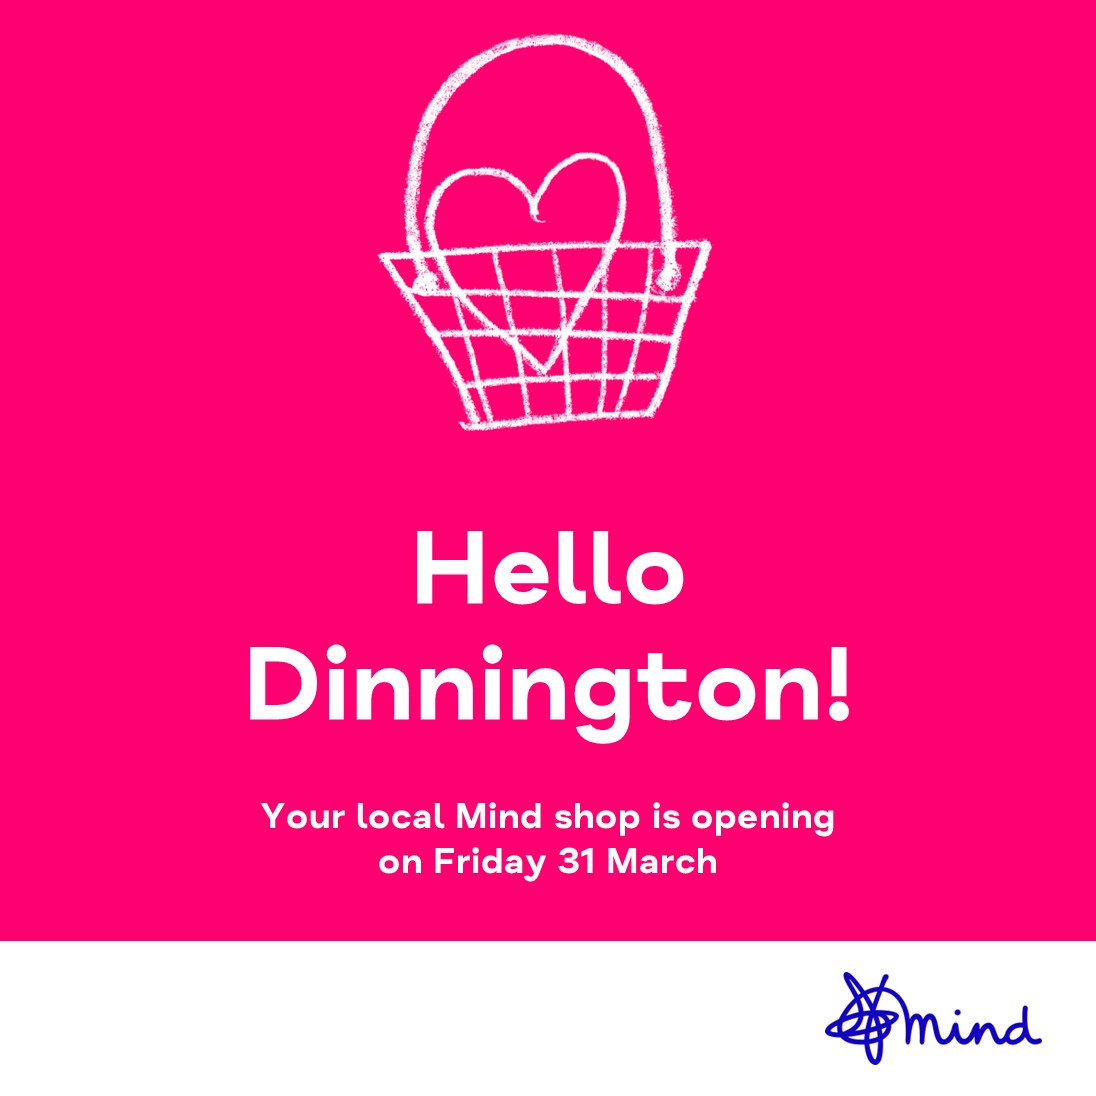 Mind shop Dinnington is opening its doors at 10am this Friday 31 March 58A Laughton Road, Dinnington, S25 2PS. Come grab bargain, donate, or volunteer for mental health #mindshop #dinnington #rotherham #workshop